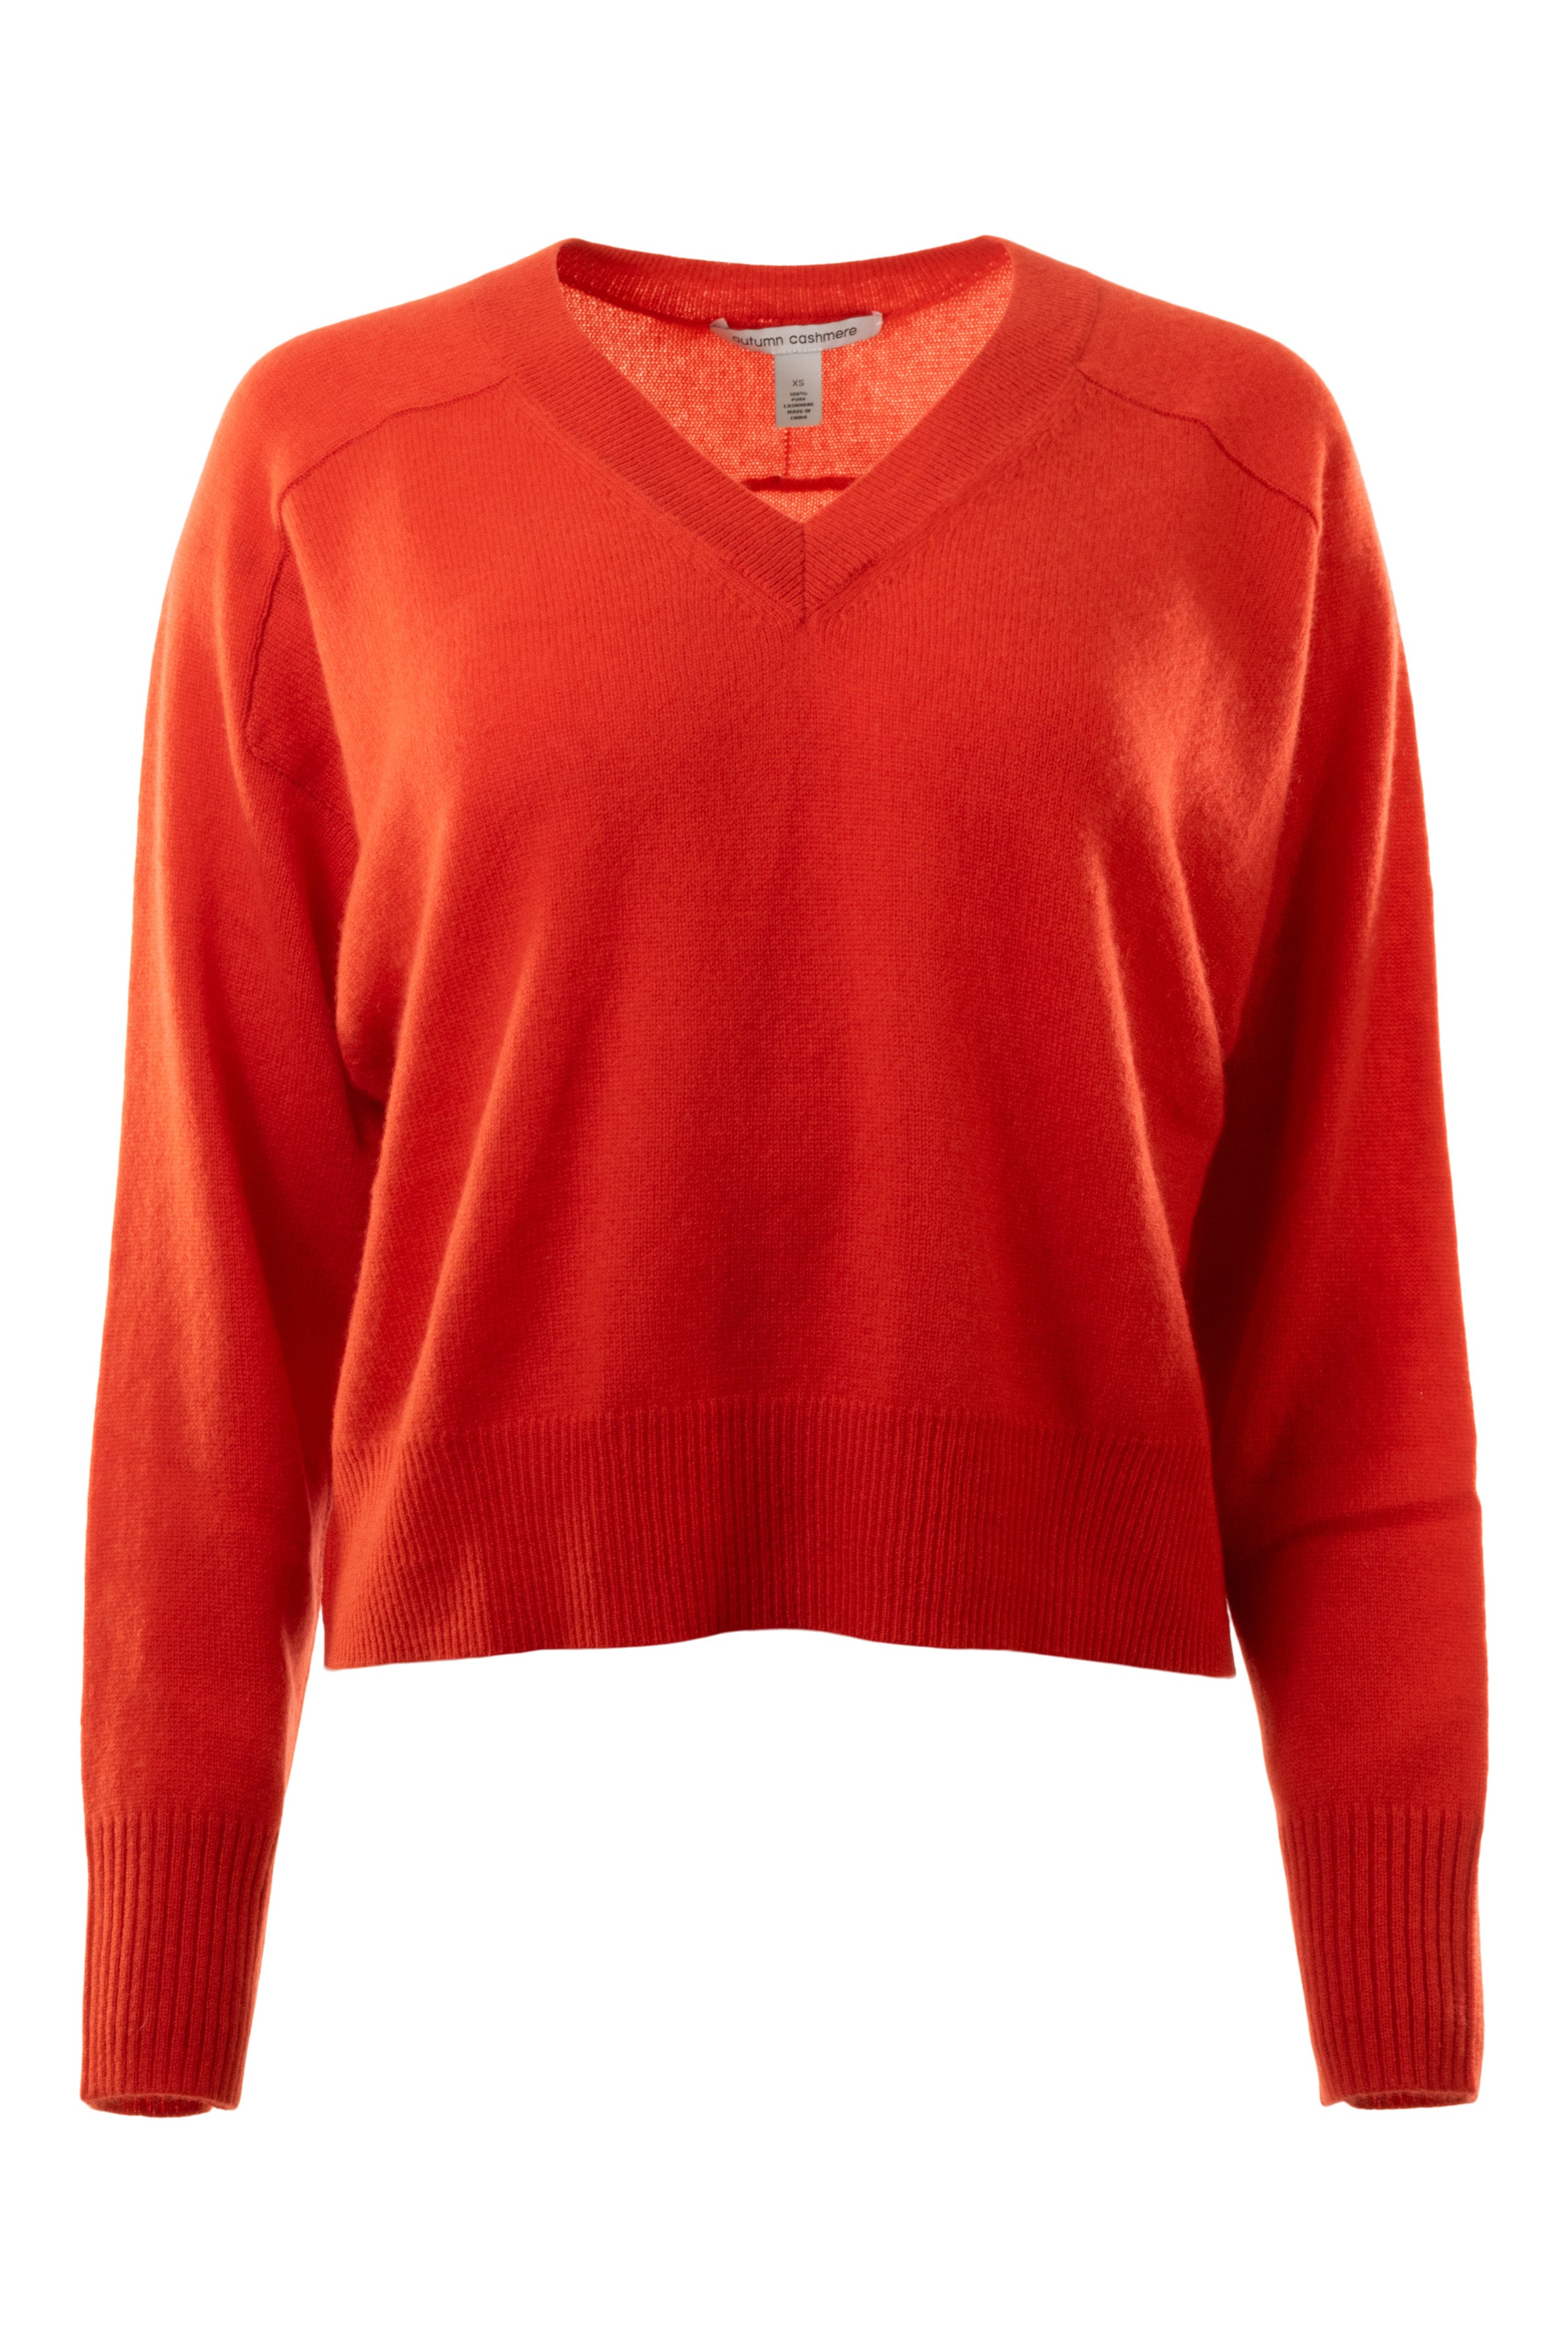 Autumn Cashmere V-neck with Back Yoke in Flame